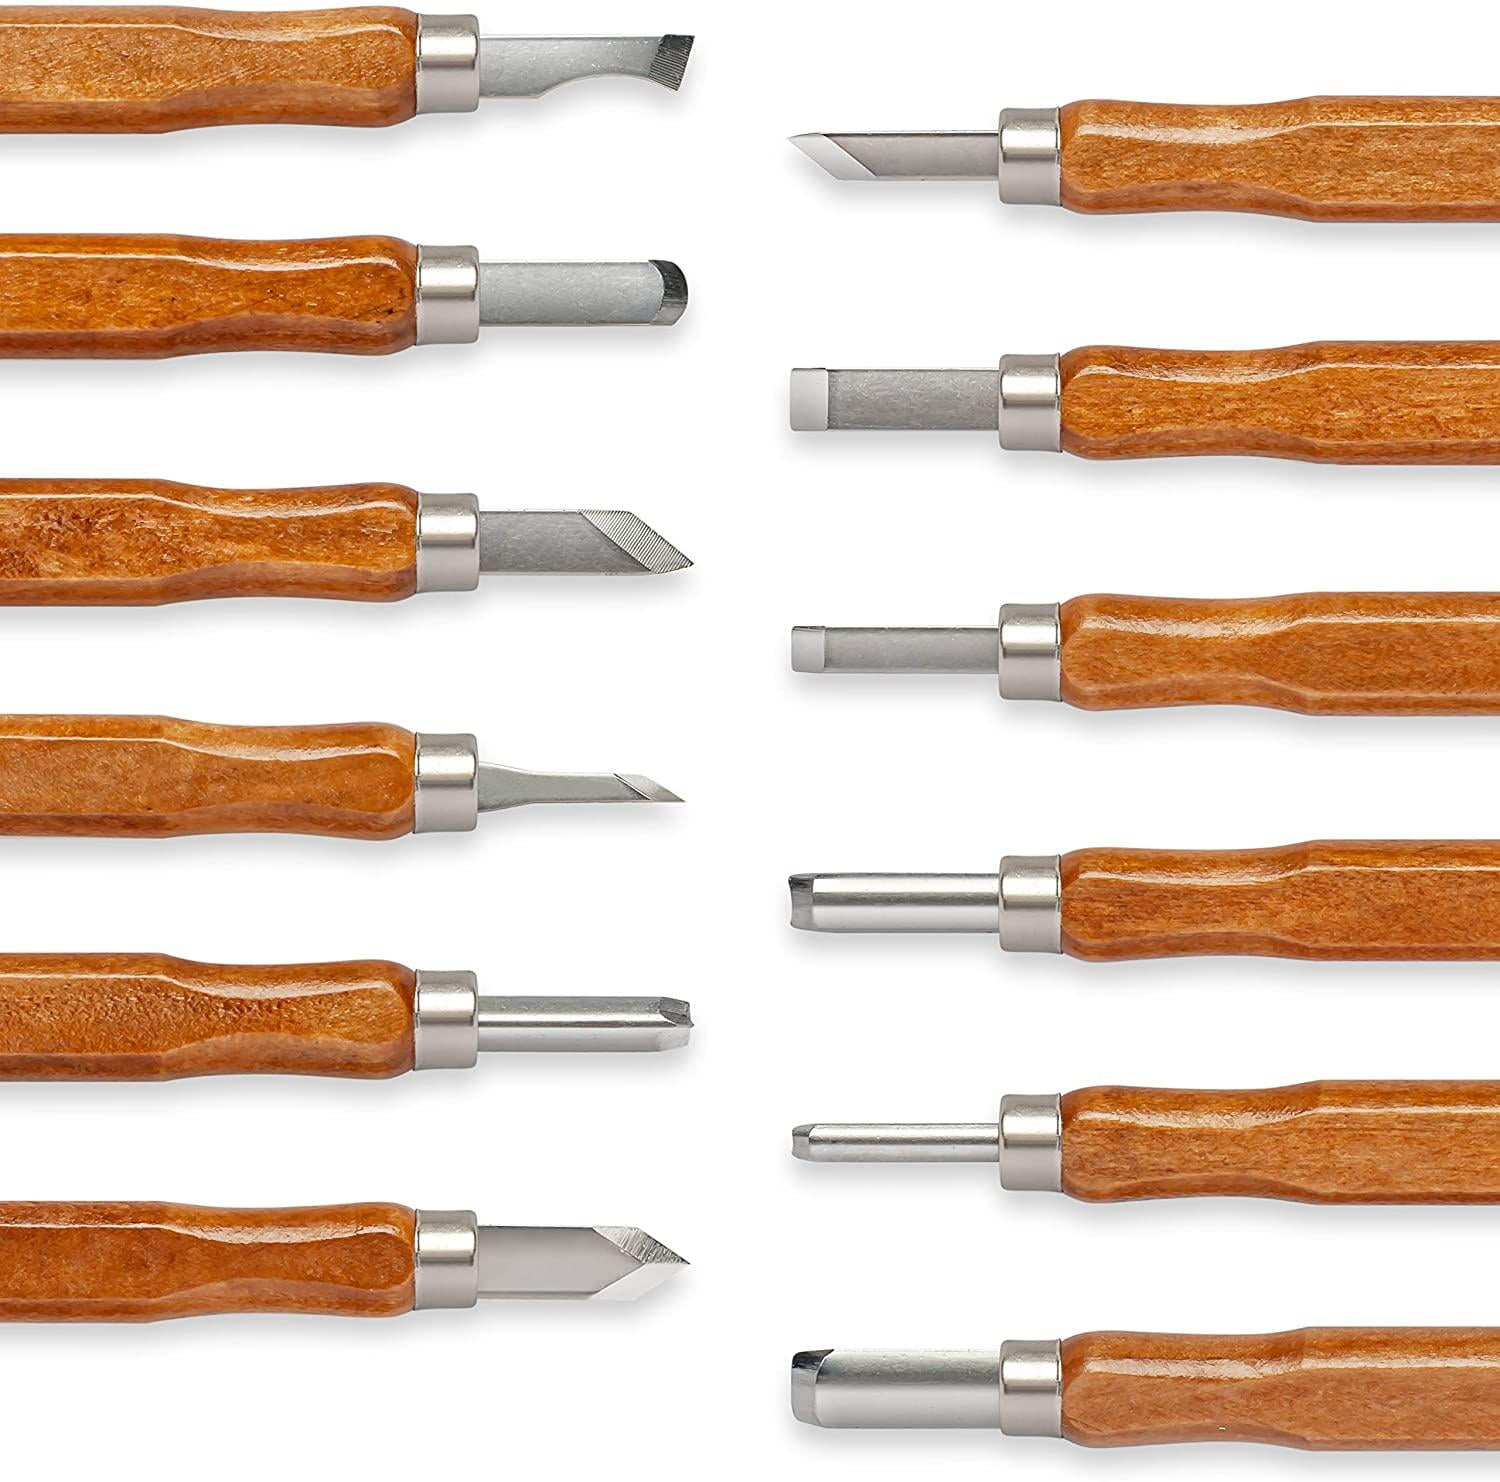 Task 12 Piece Wood Carving Set Clay Wax Hobby Chisels Gouges DIY Tool 